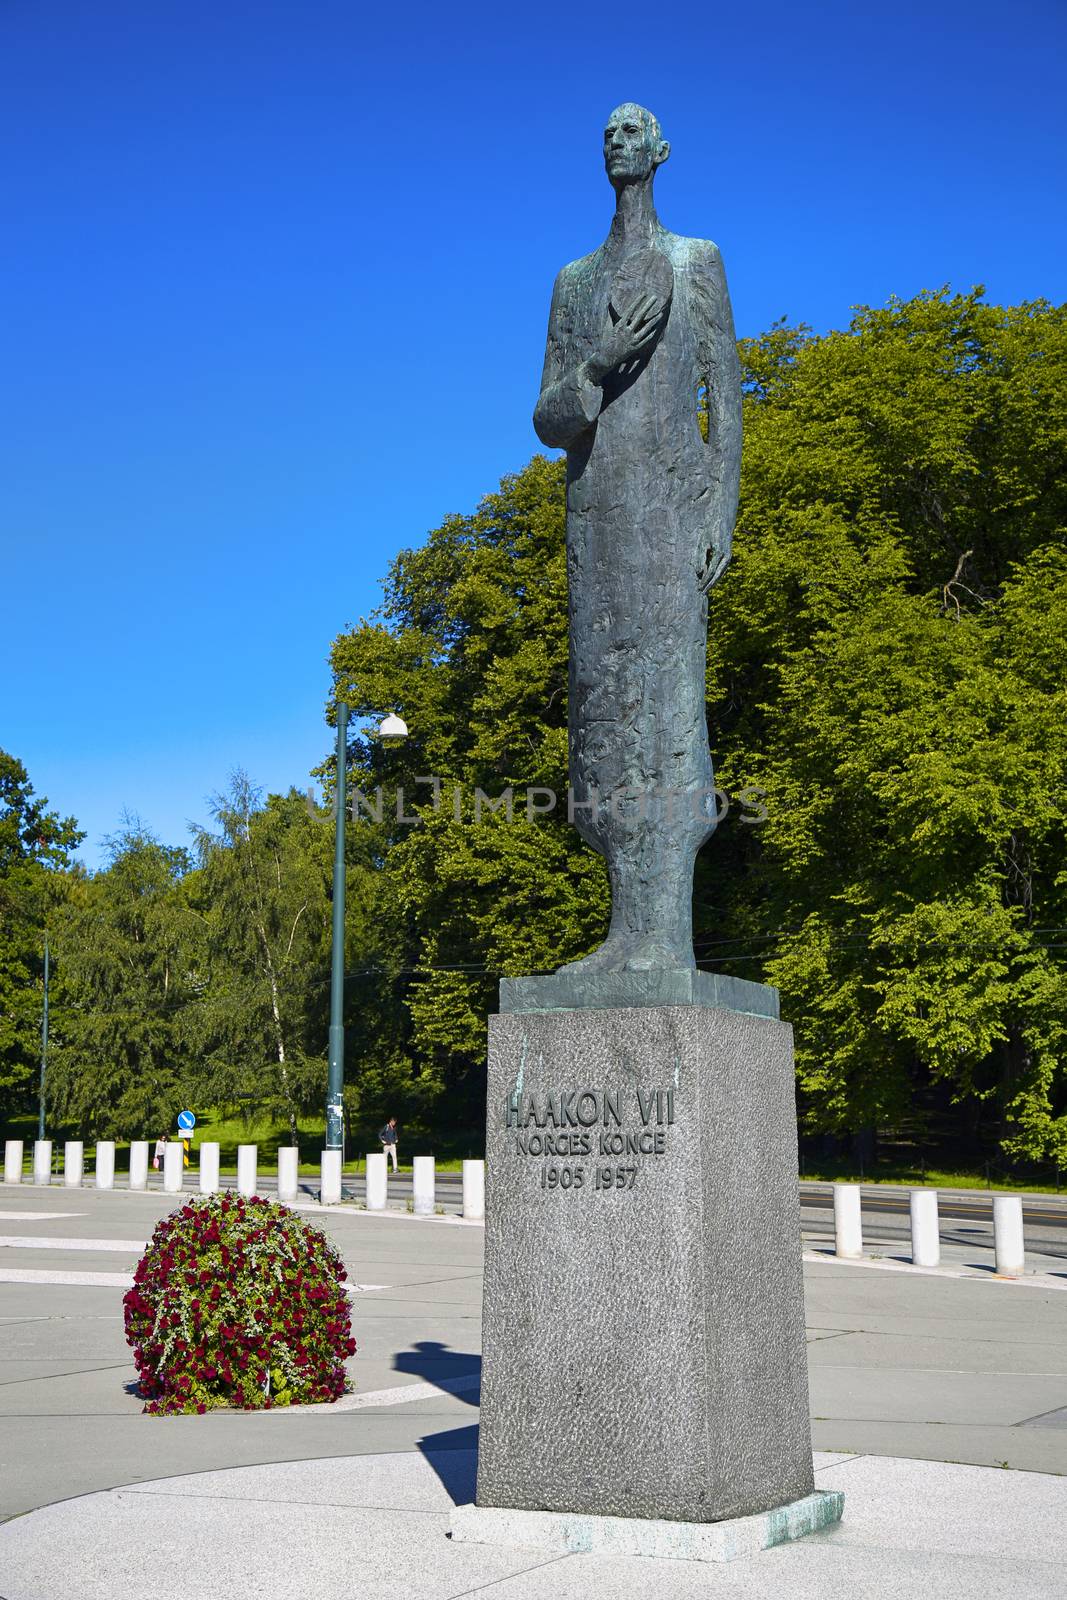 OSLO, NORWAY – AUGUST 17, 2016: Statue of King Haakon VII of N by vladacanon